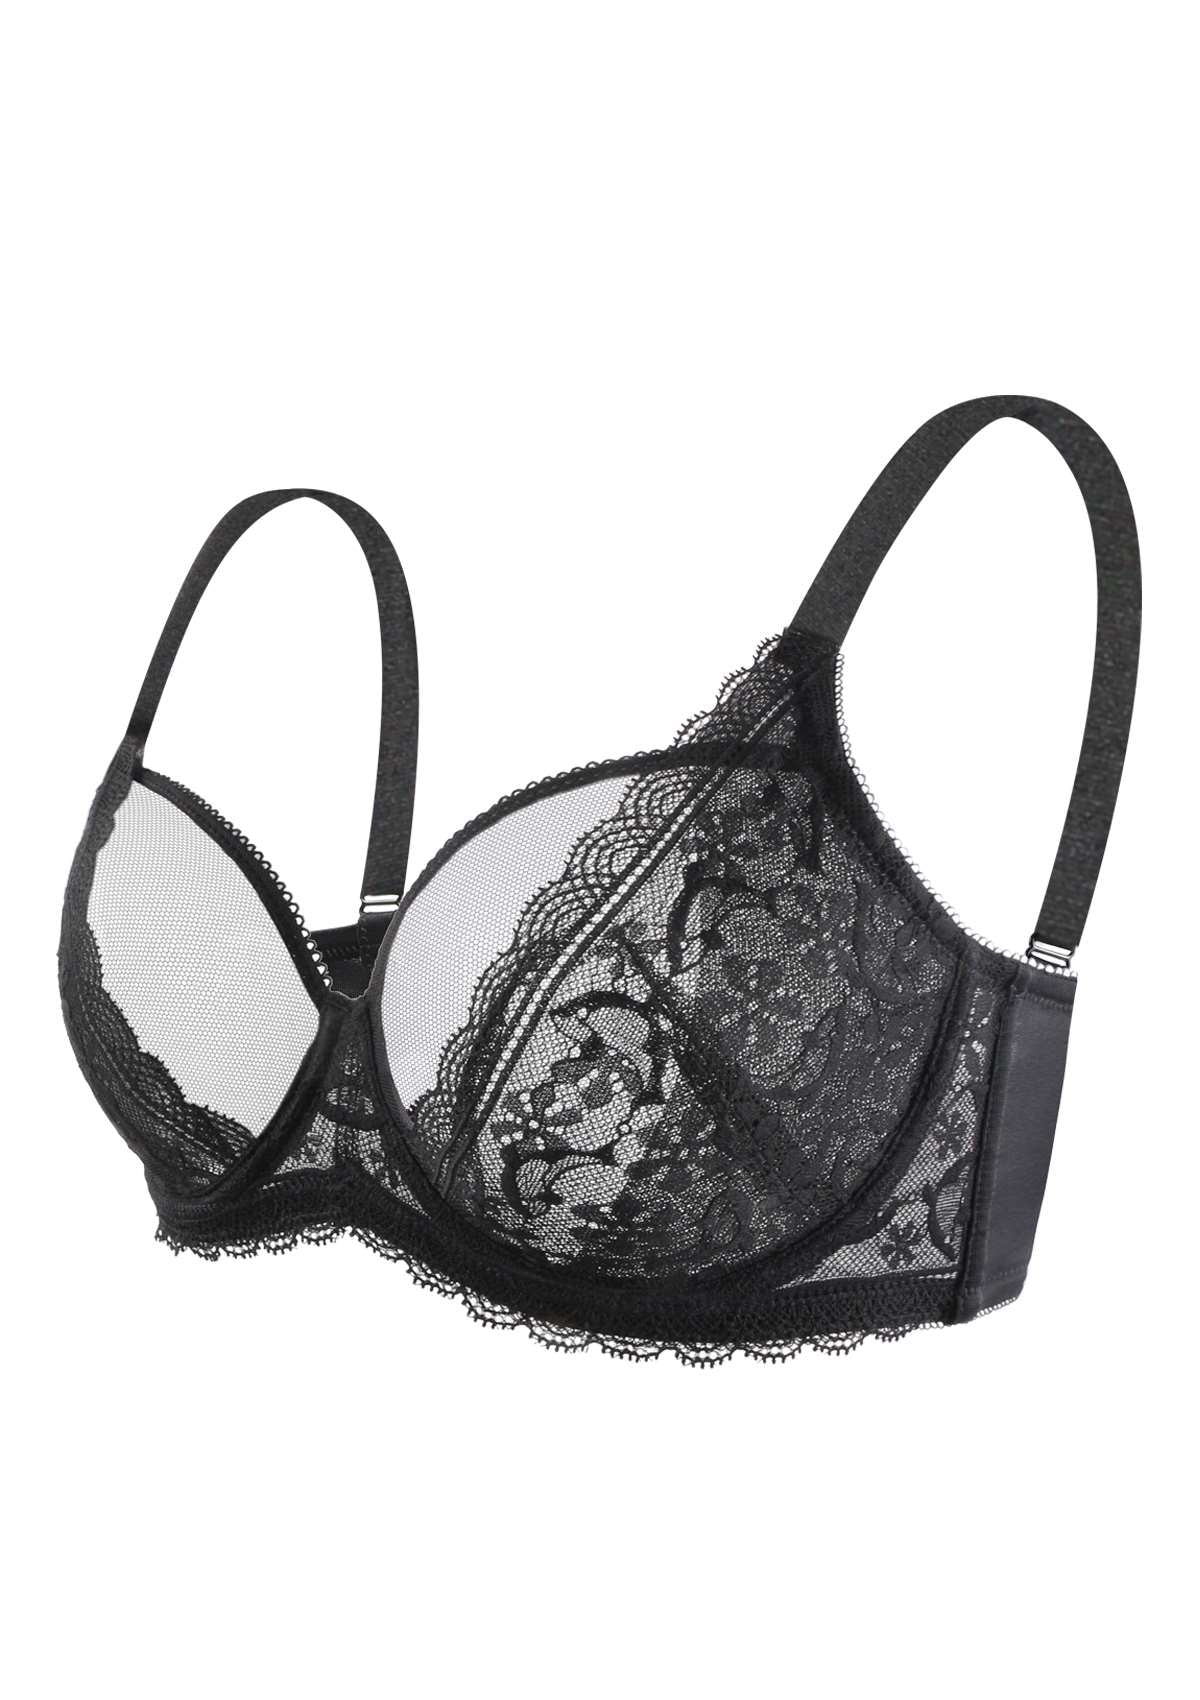 HSIA Anemone Lace Bra And Panties: Back Support Wired Bra - Black / 38 / DDD/F